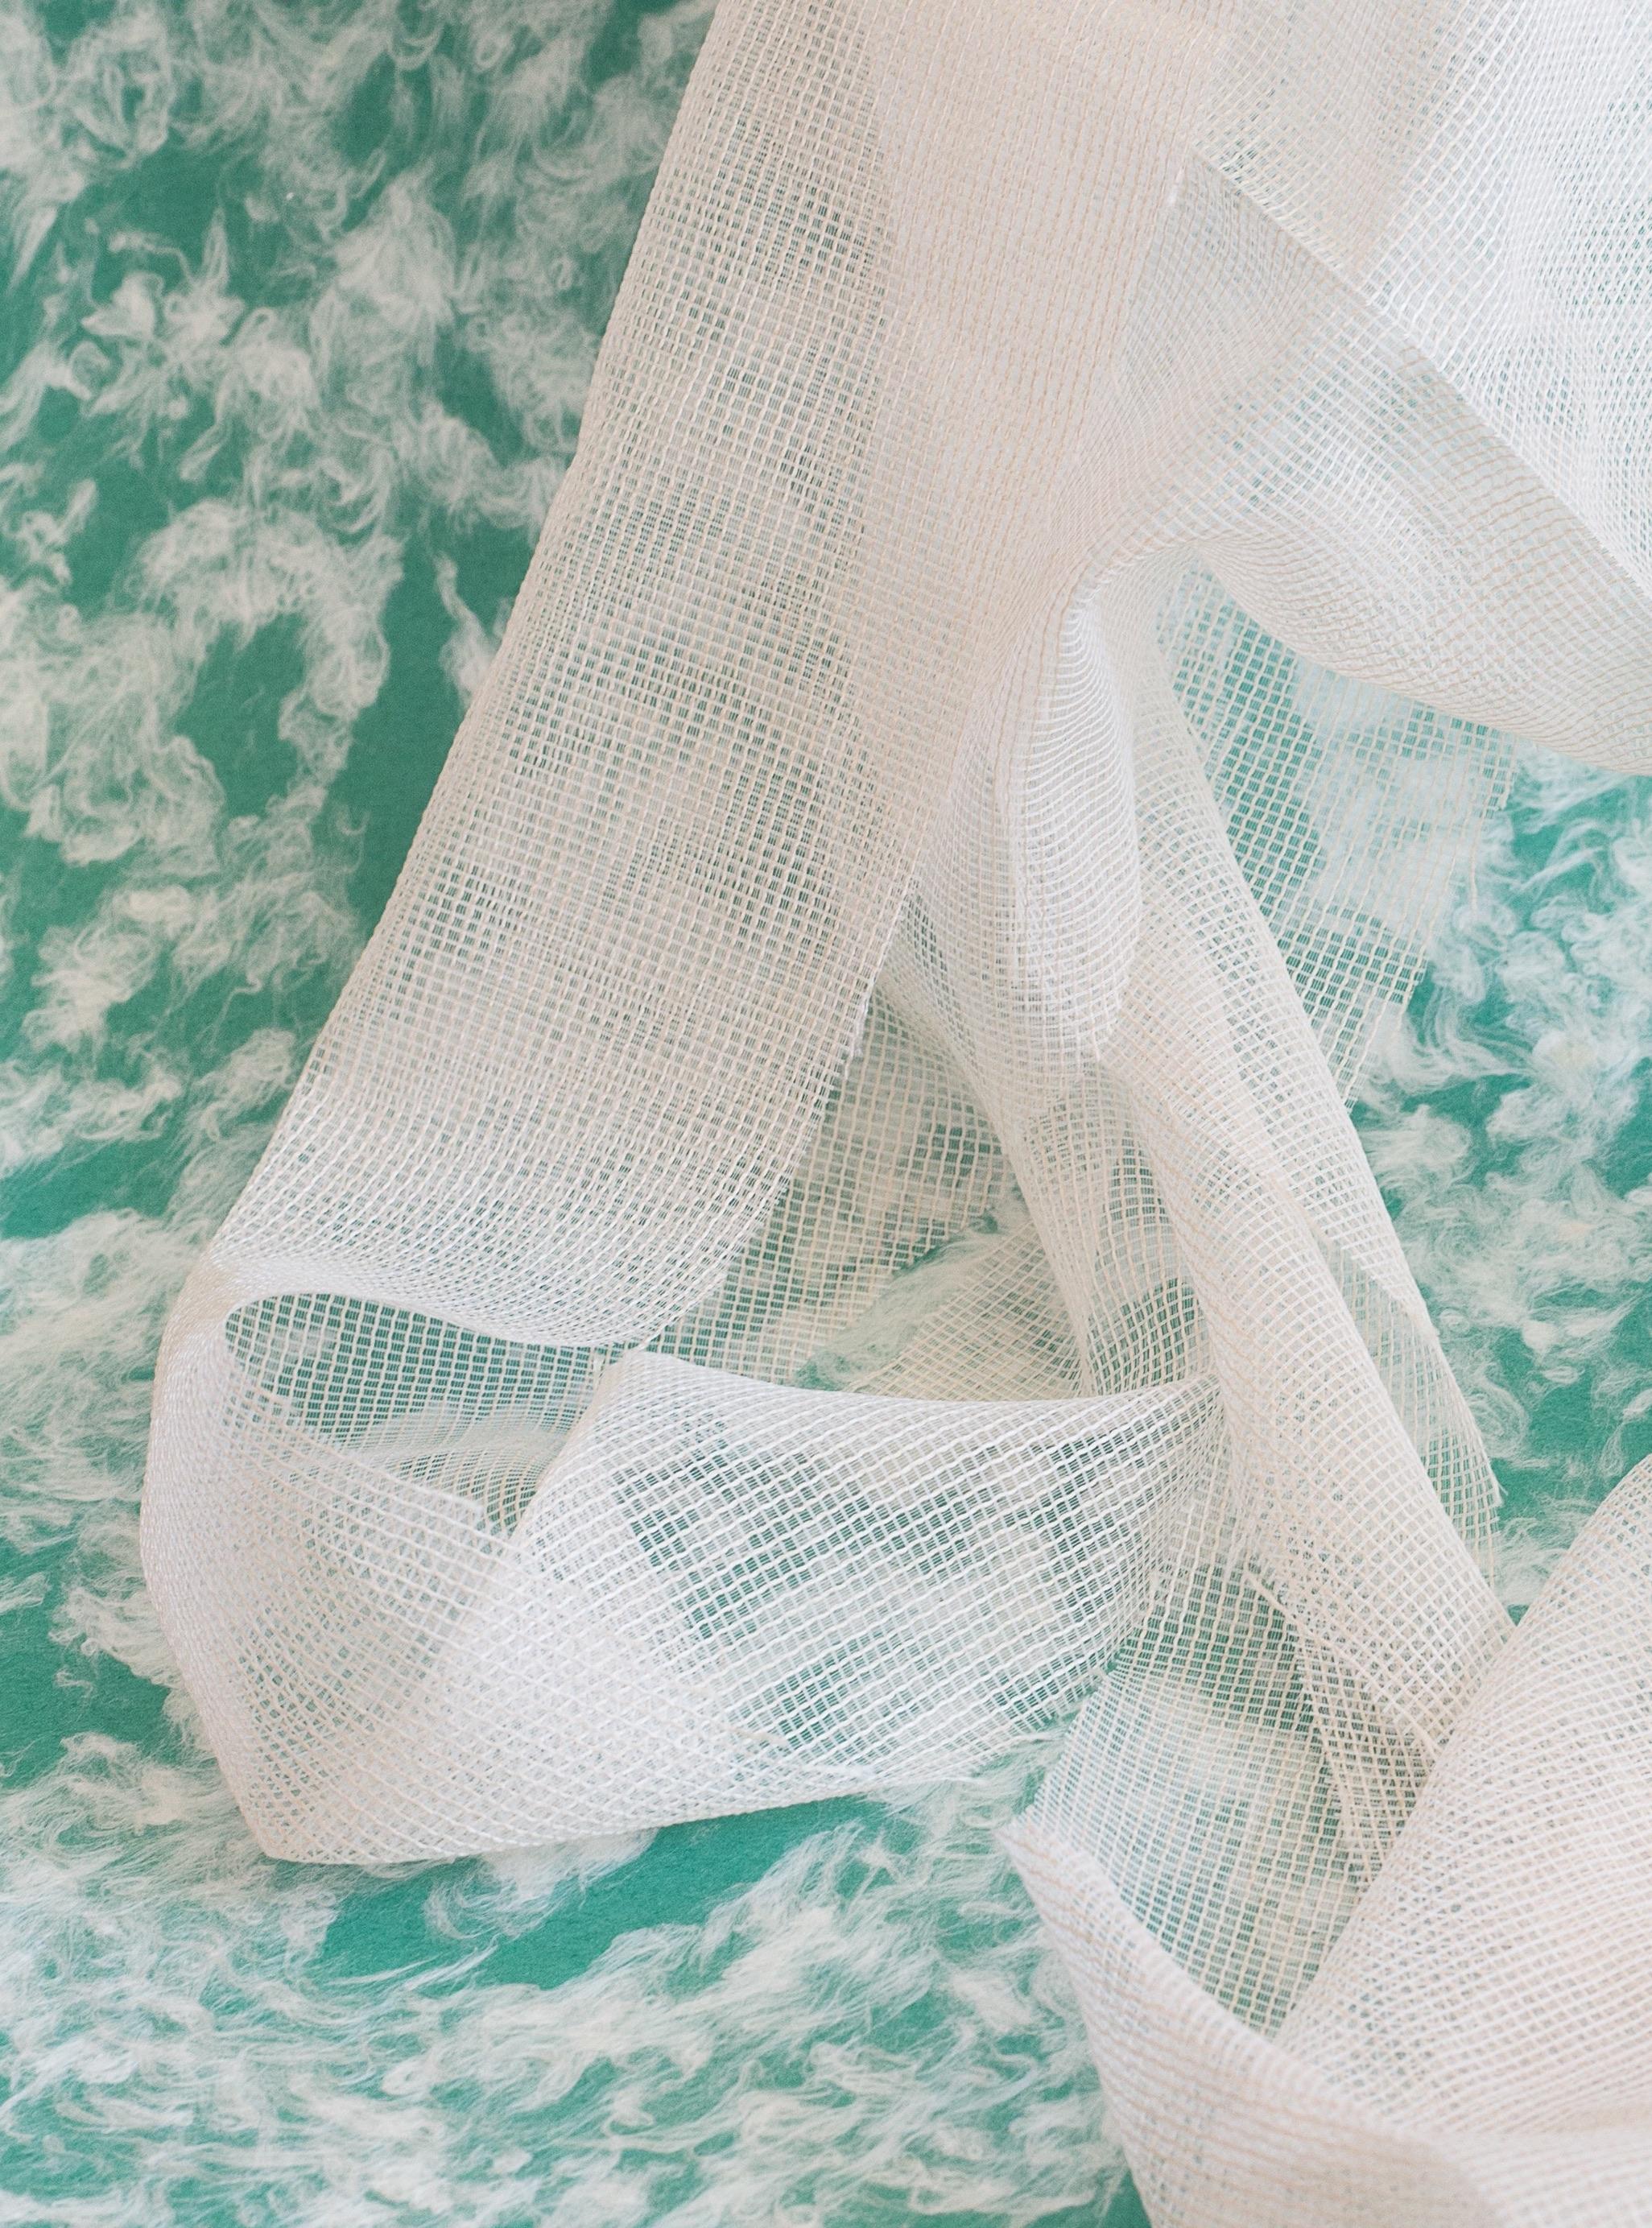 the precise location (of a place) - Turquoise photo, draped white fabric (12x18) - Photograph by Alison Postma